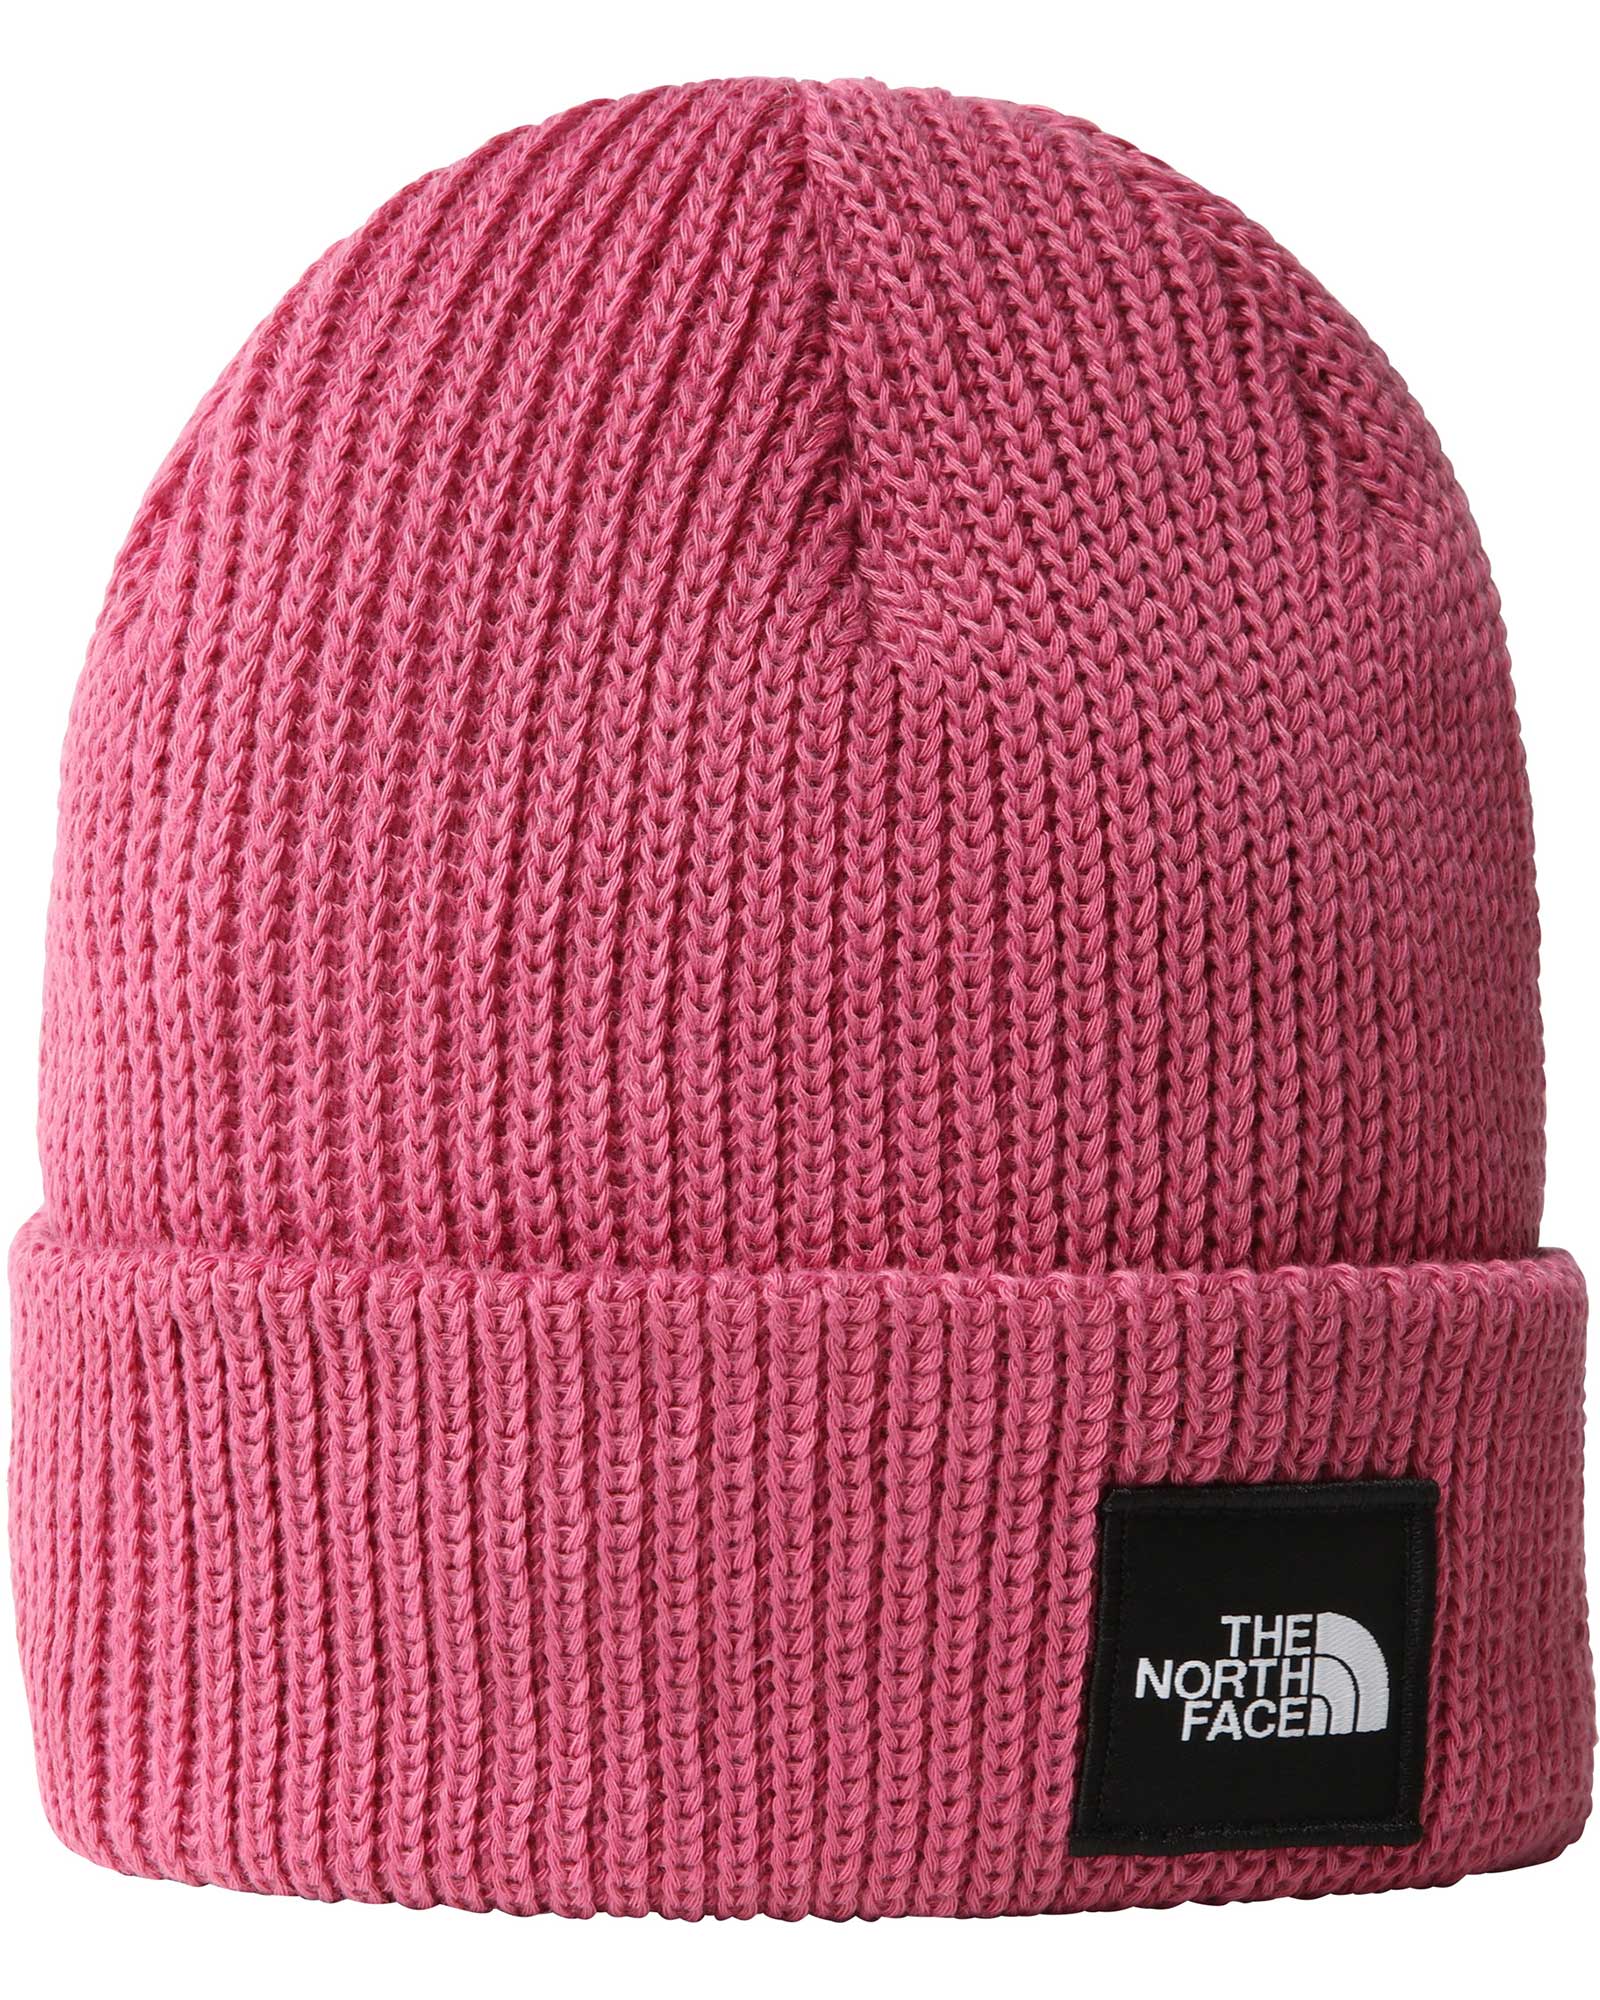 The North Face Black Box Beanie - Red Violet